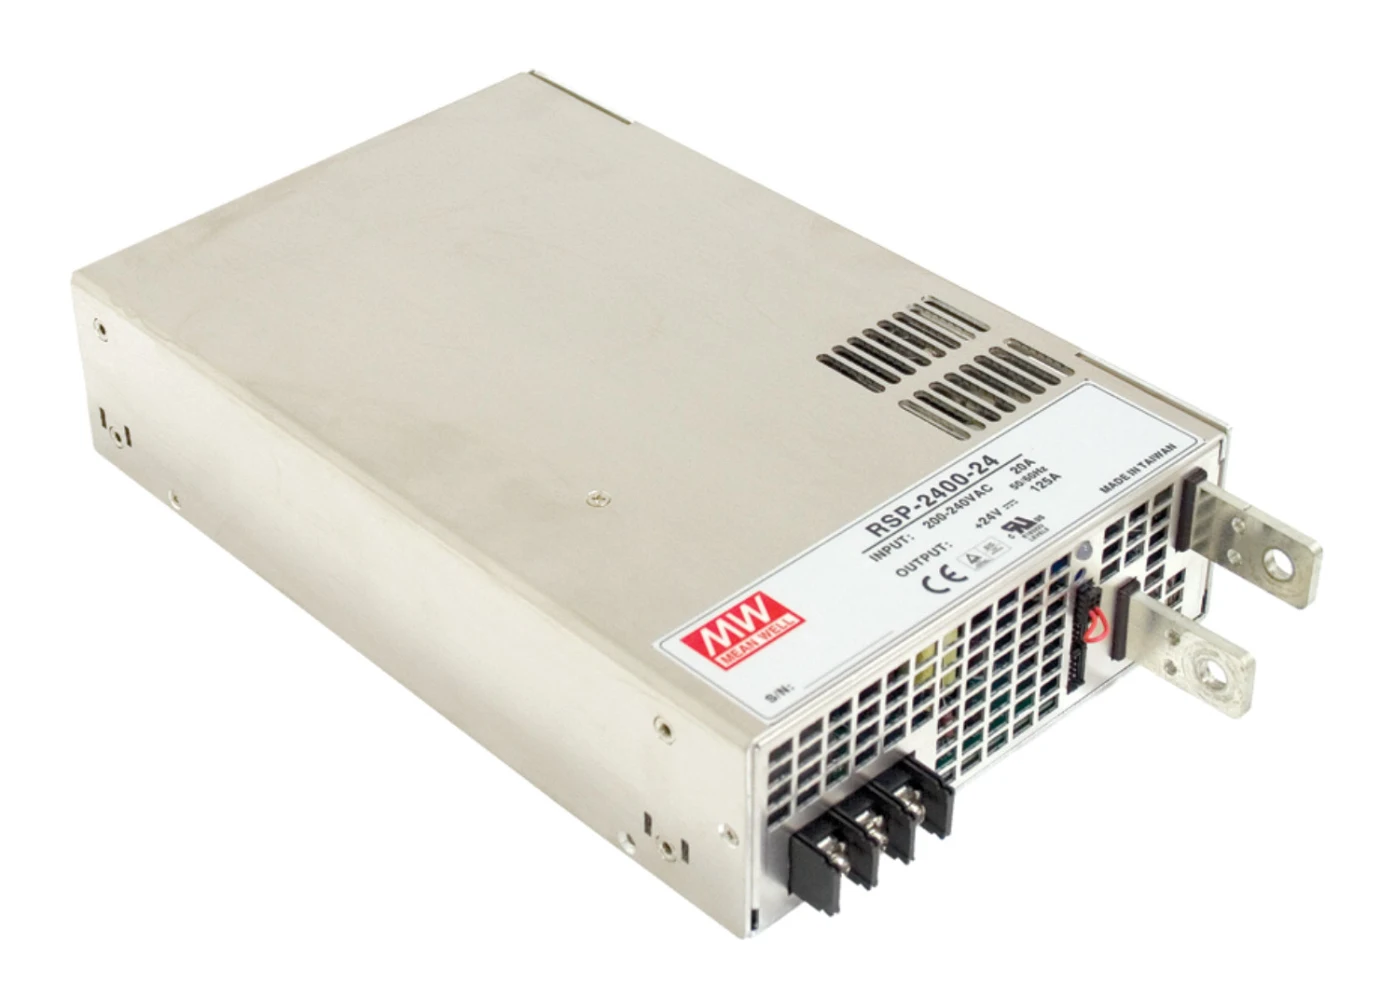 

transmit MEAN WELL Taiwan RSP-2400 24V/12V/48V 2400W high-efficiency parallel high-power PFC switching power supply